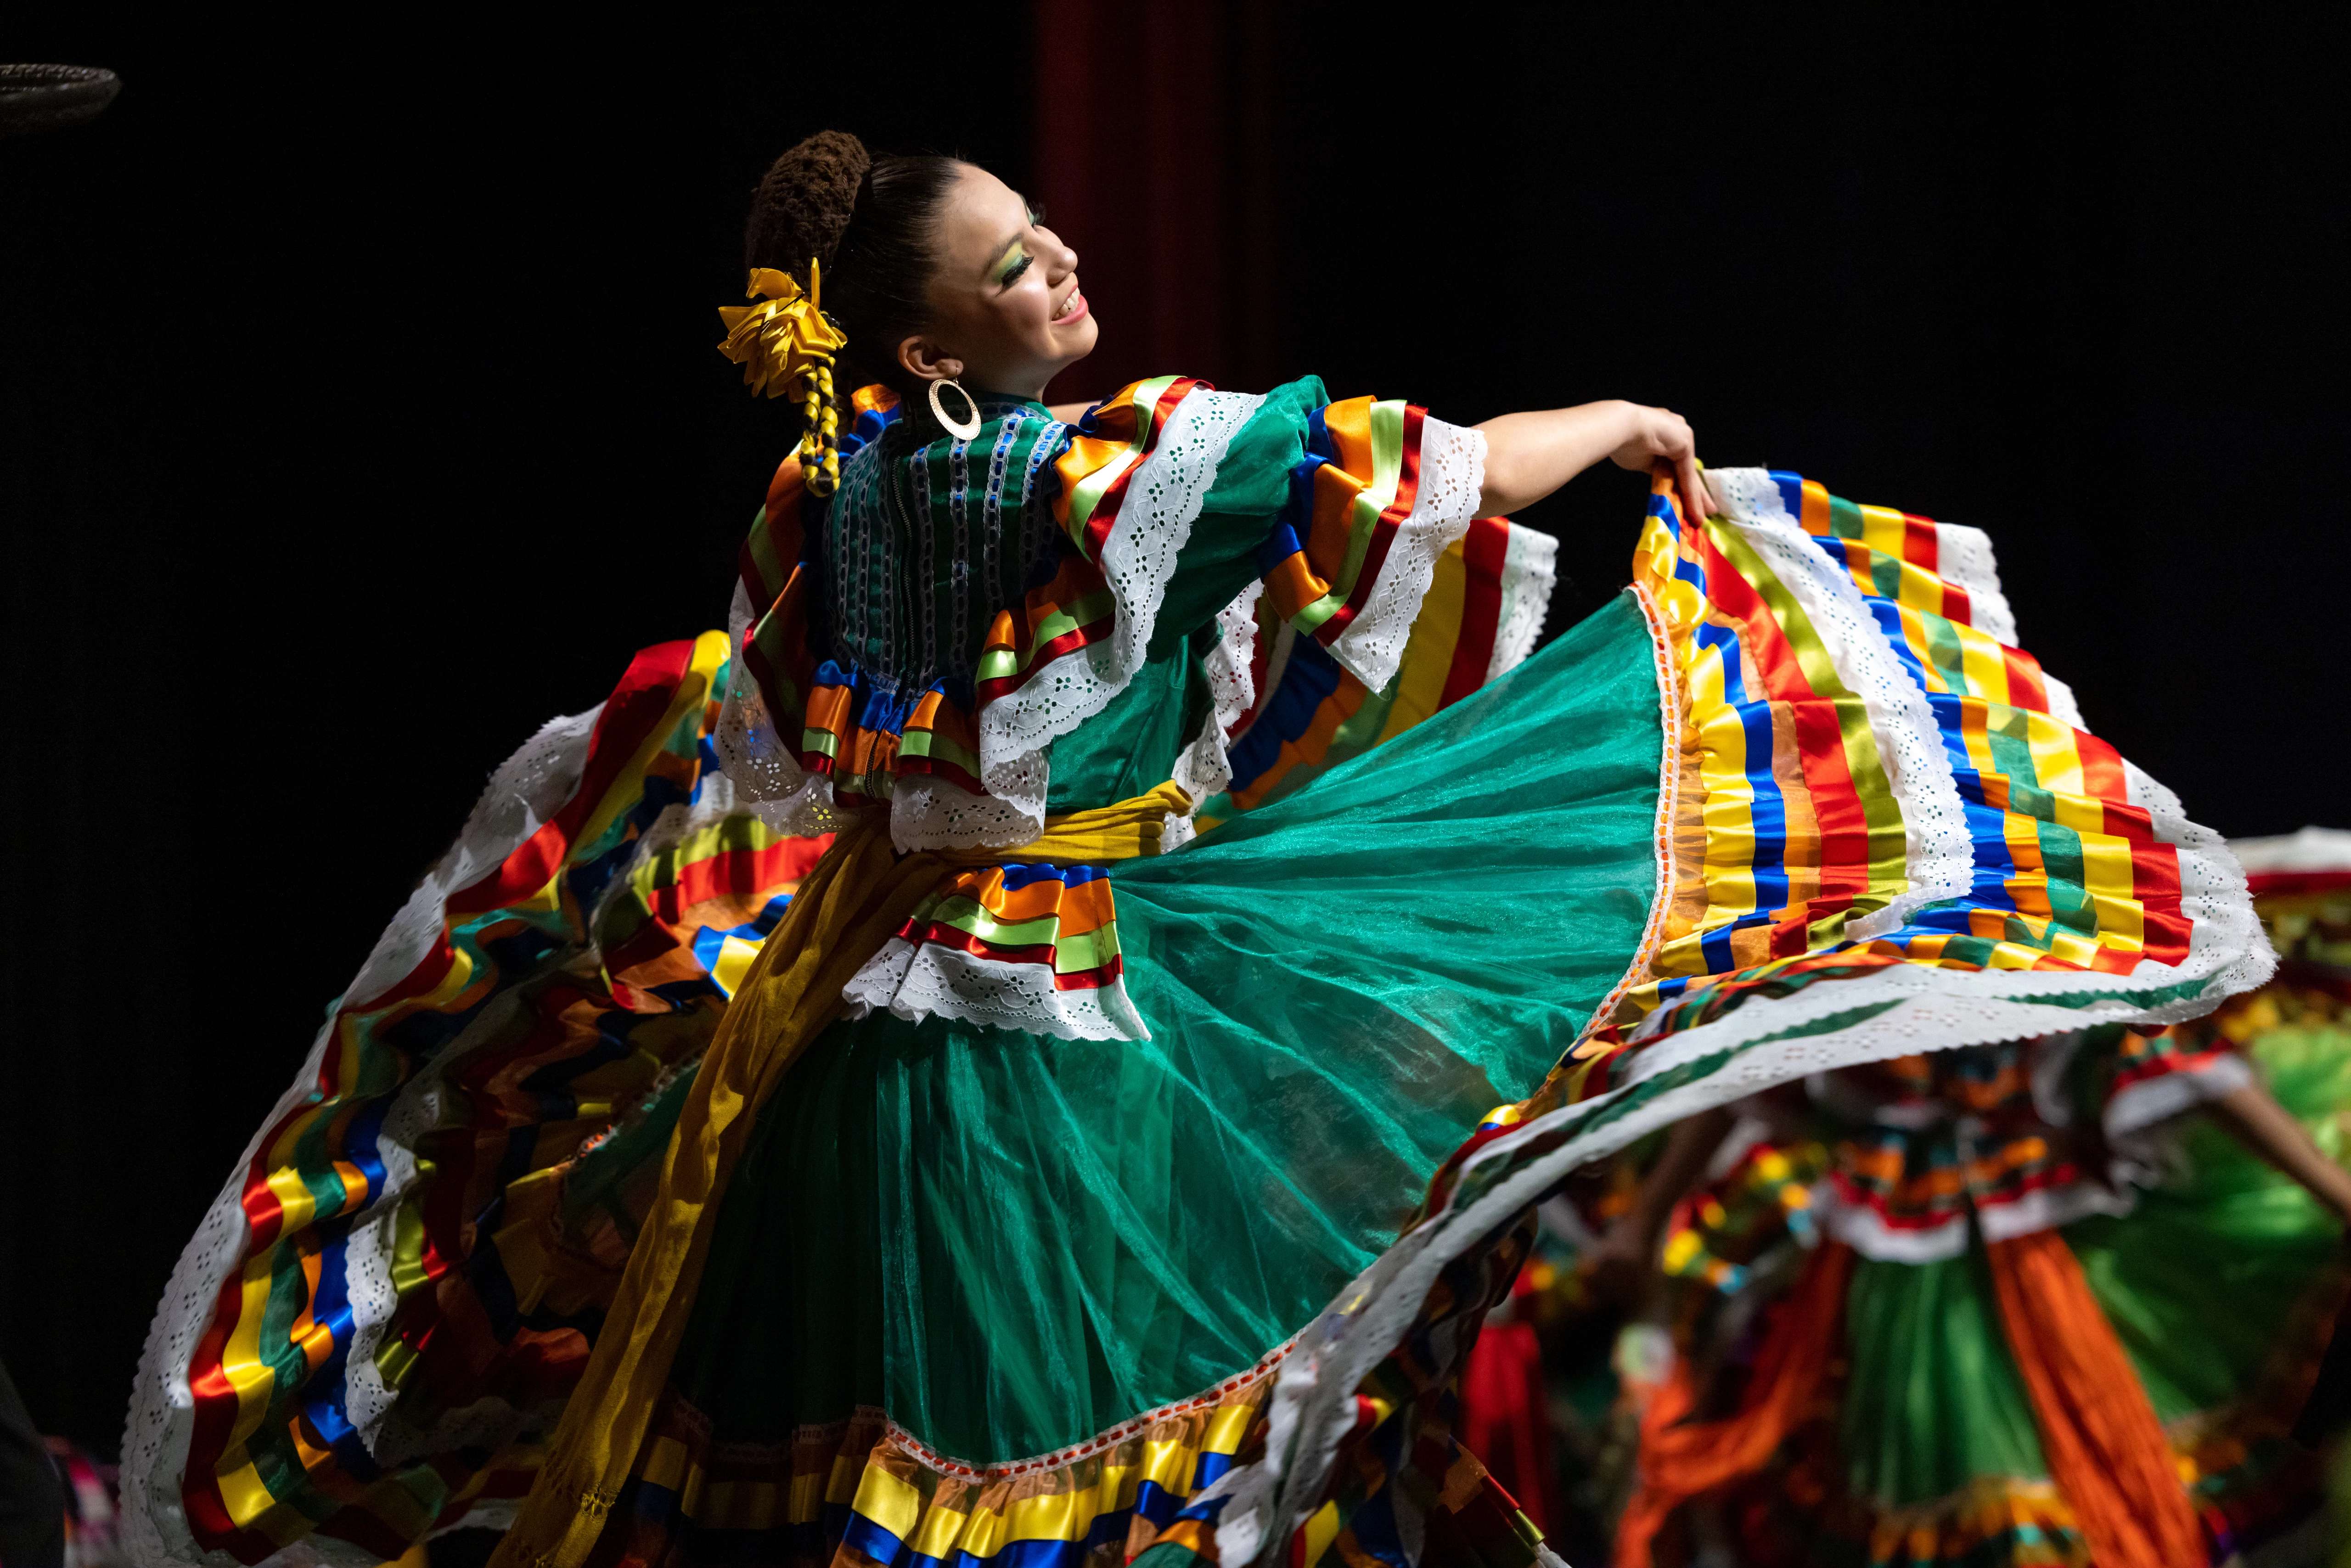 A student performs a dance at the Hispanic Convocation